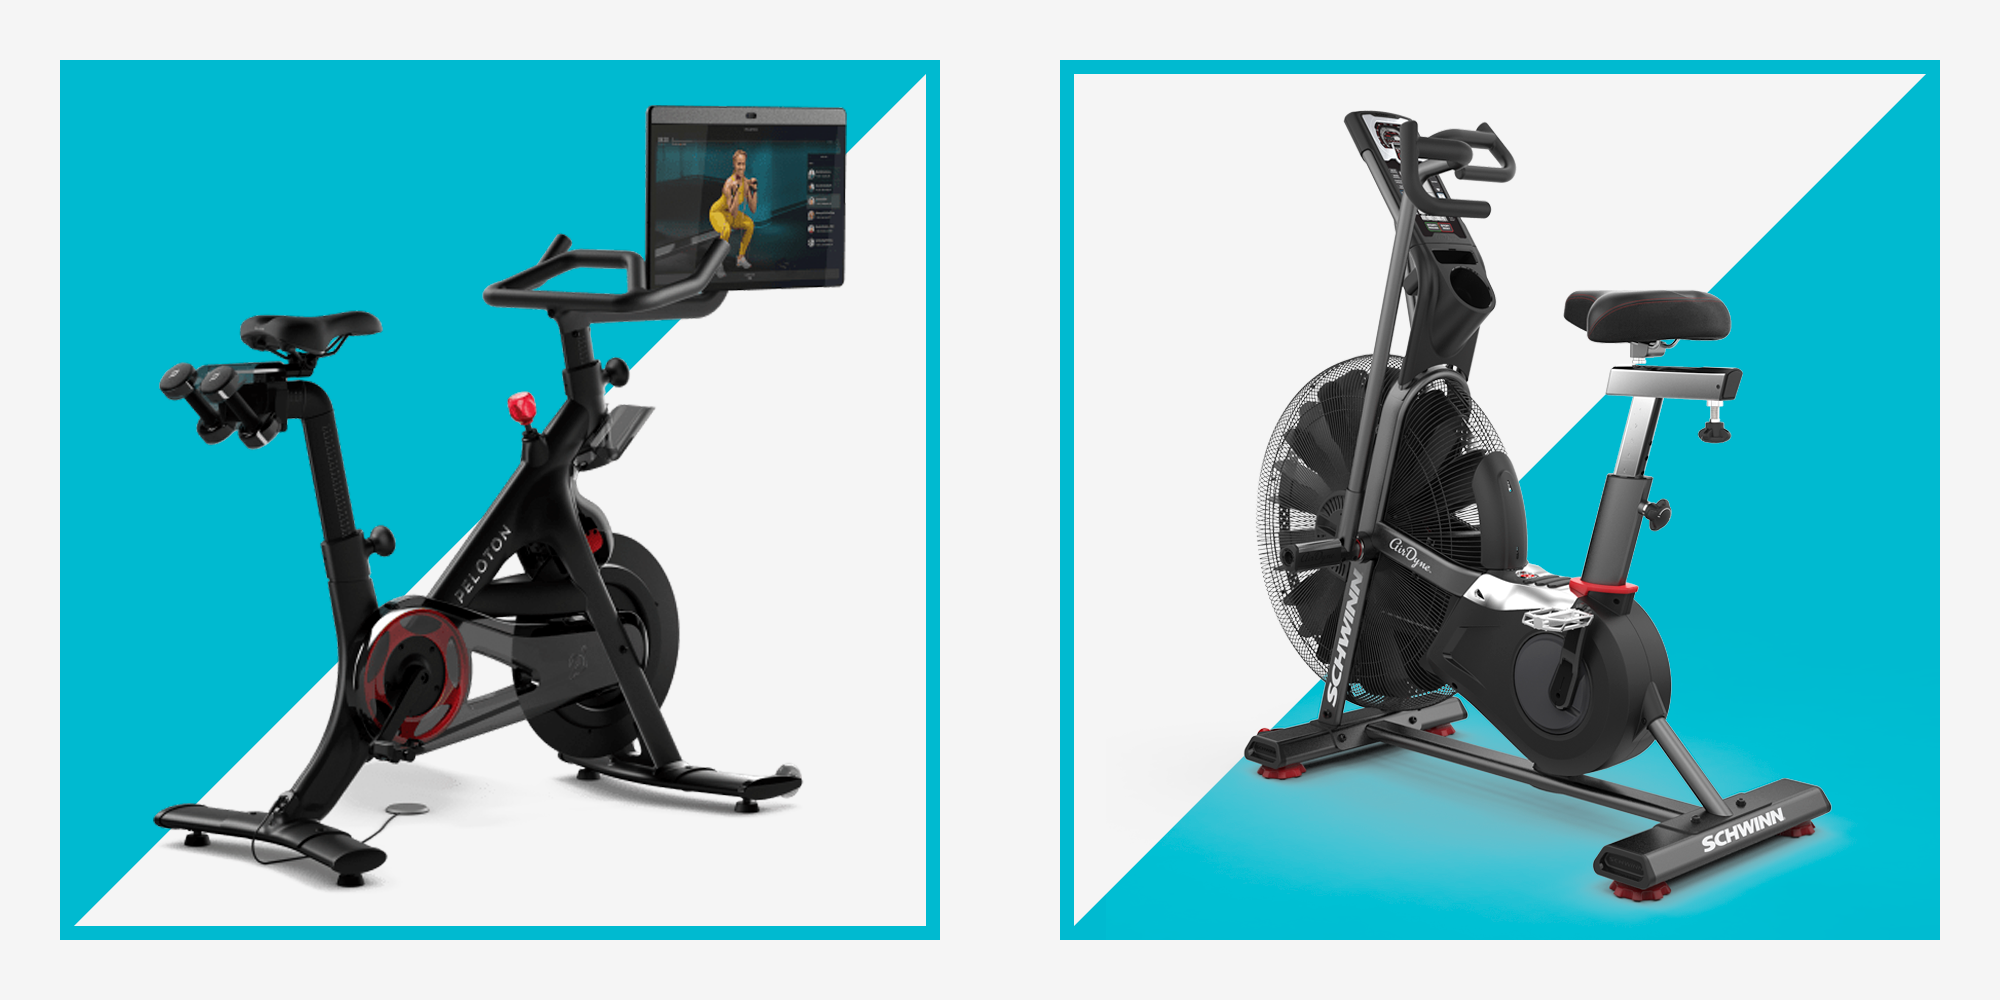 Details about   Indoor Bicycle Cycling Fitness Home Gym Exercise Stationary Bike Cardio Workout 